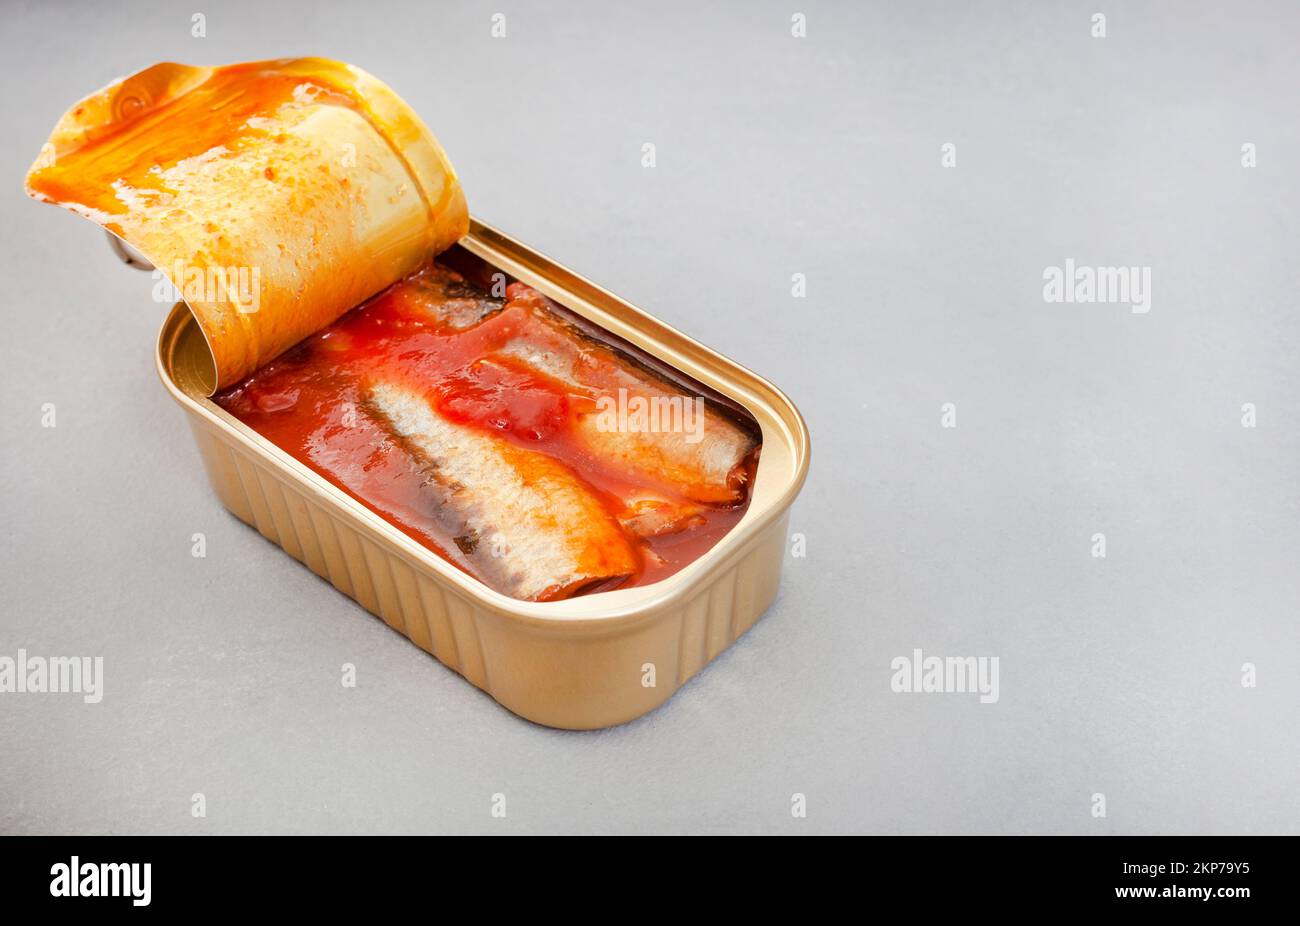 Canned sardines with tomato on grey surface with copy space Stock Photo